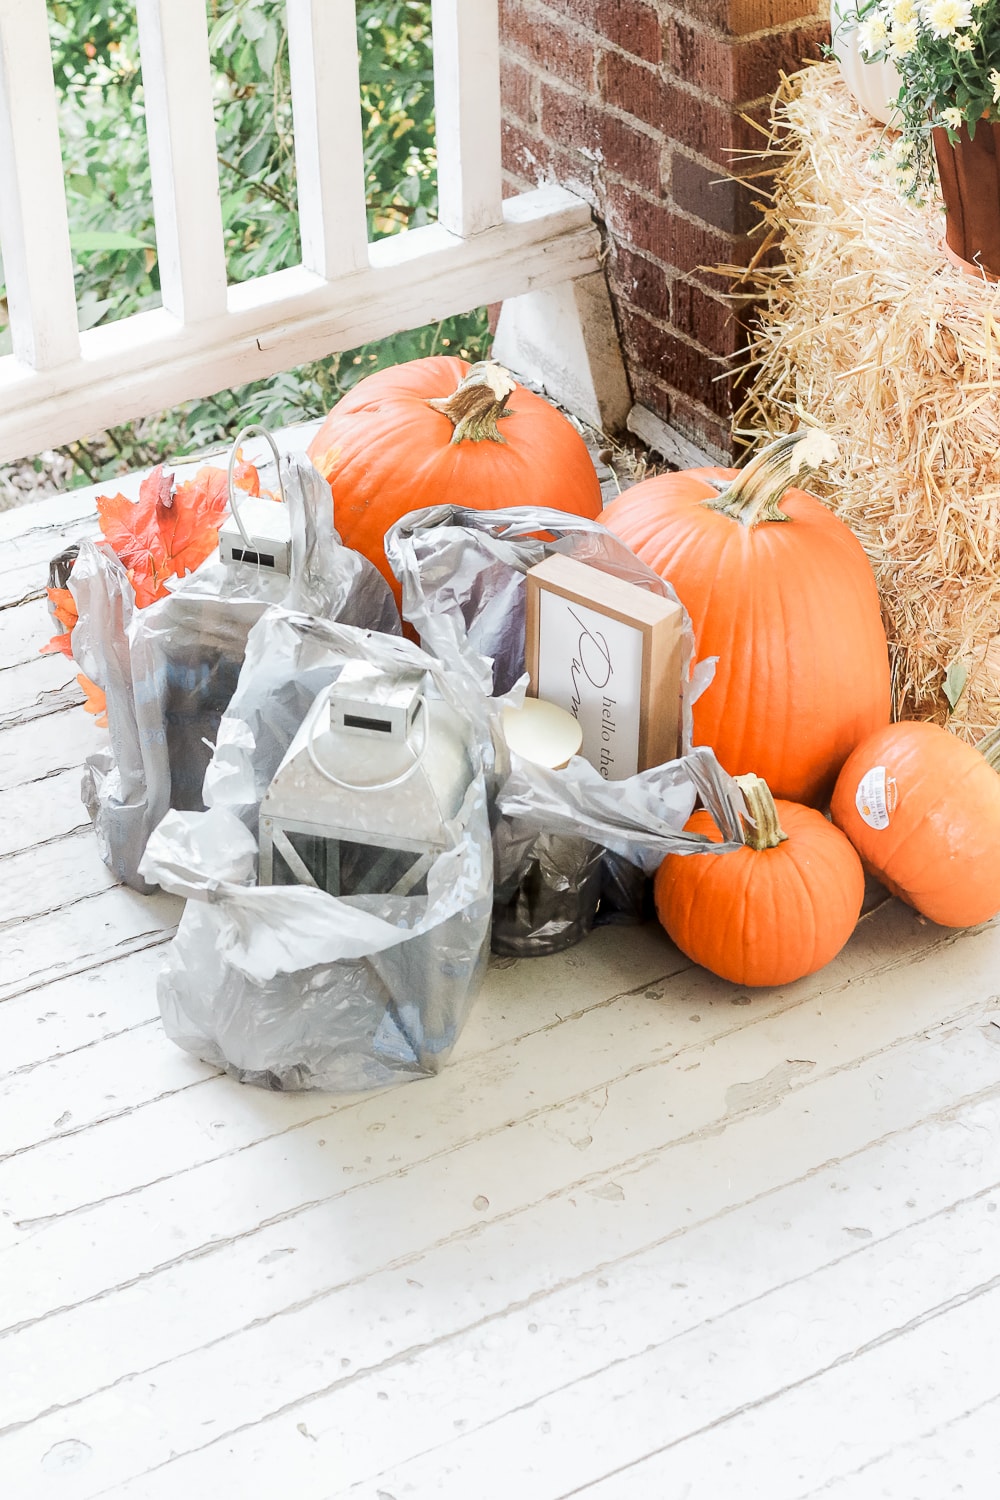 Blogger Stephanie Ziajka shares some affordable fall decor from Walmart+ that she had delivered for free using her new Walmart+ membership on Diary of a Debutante